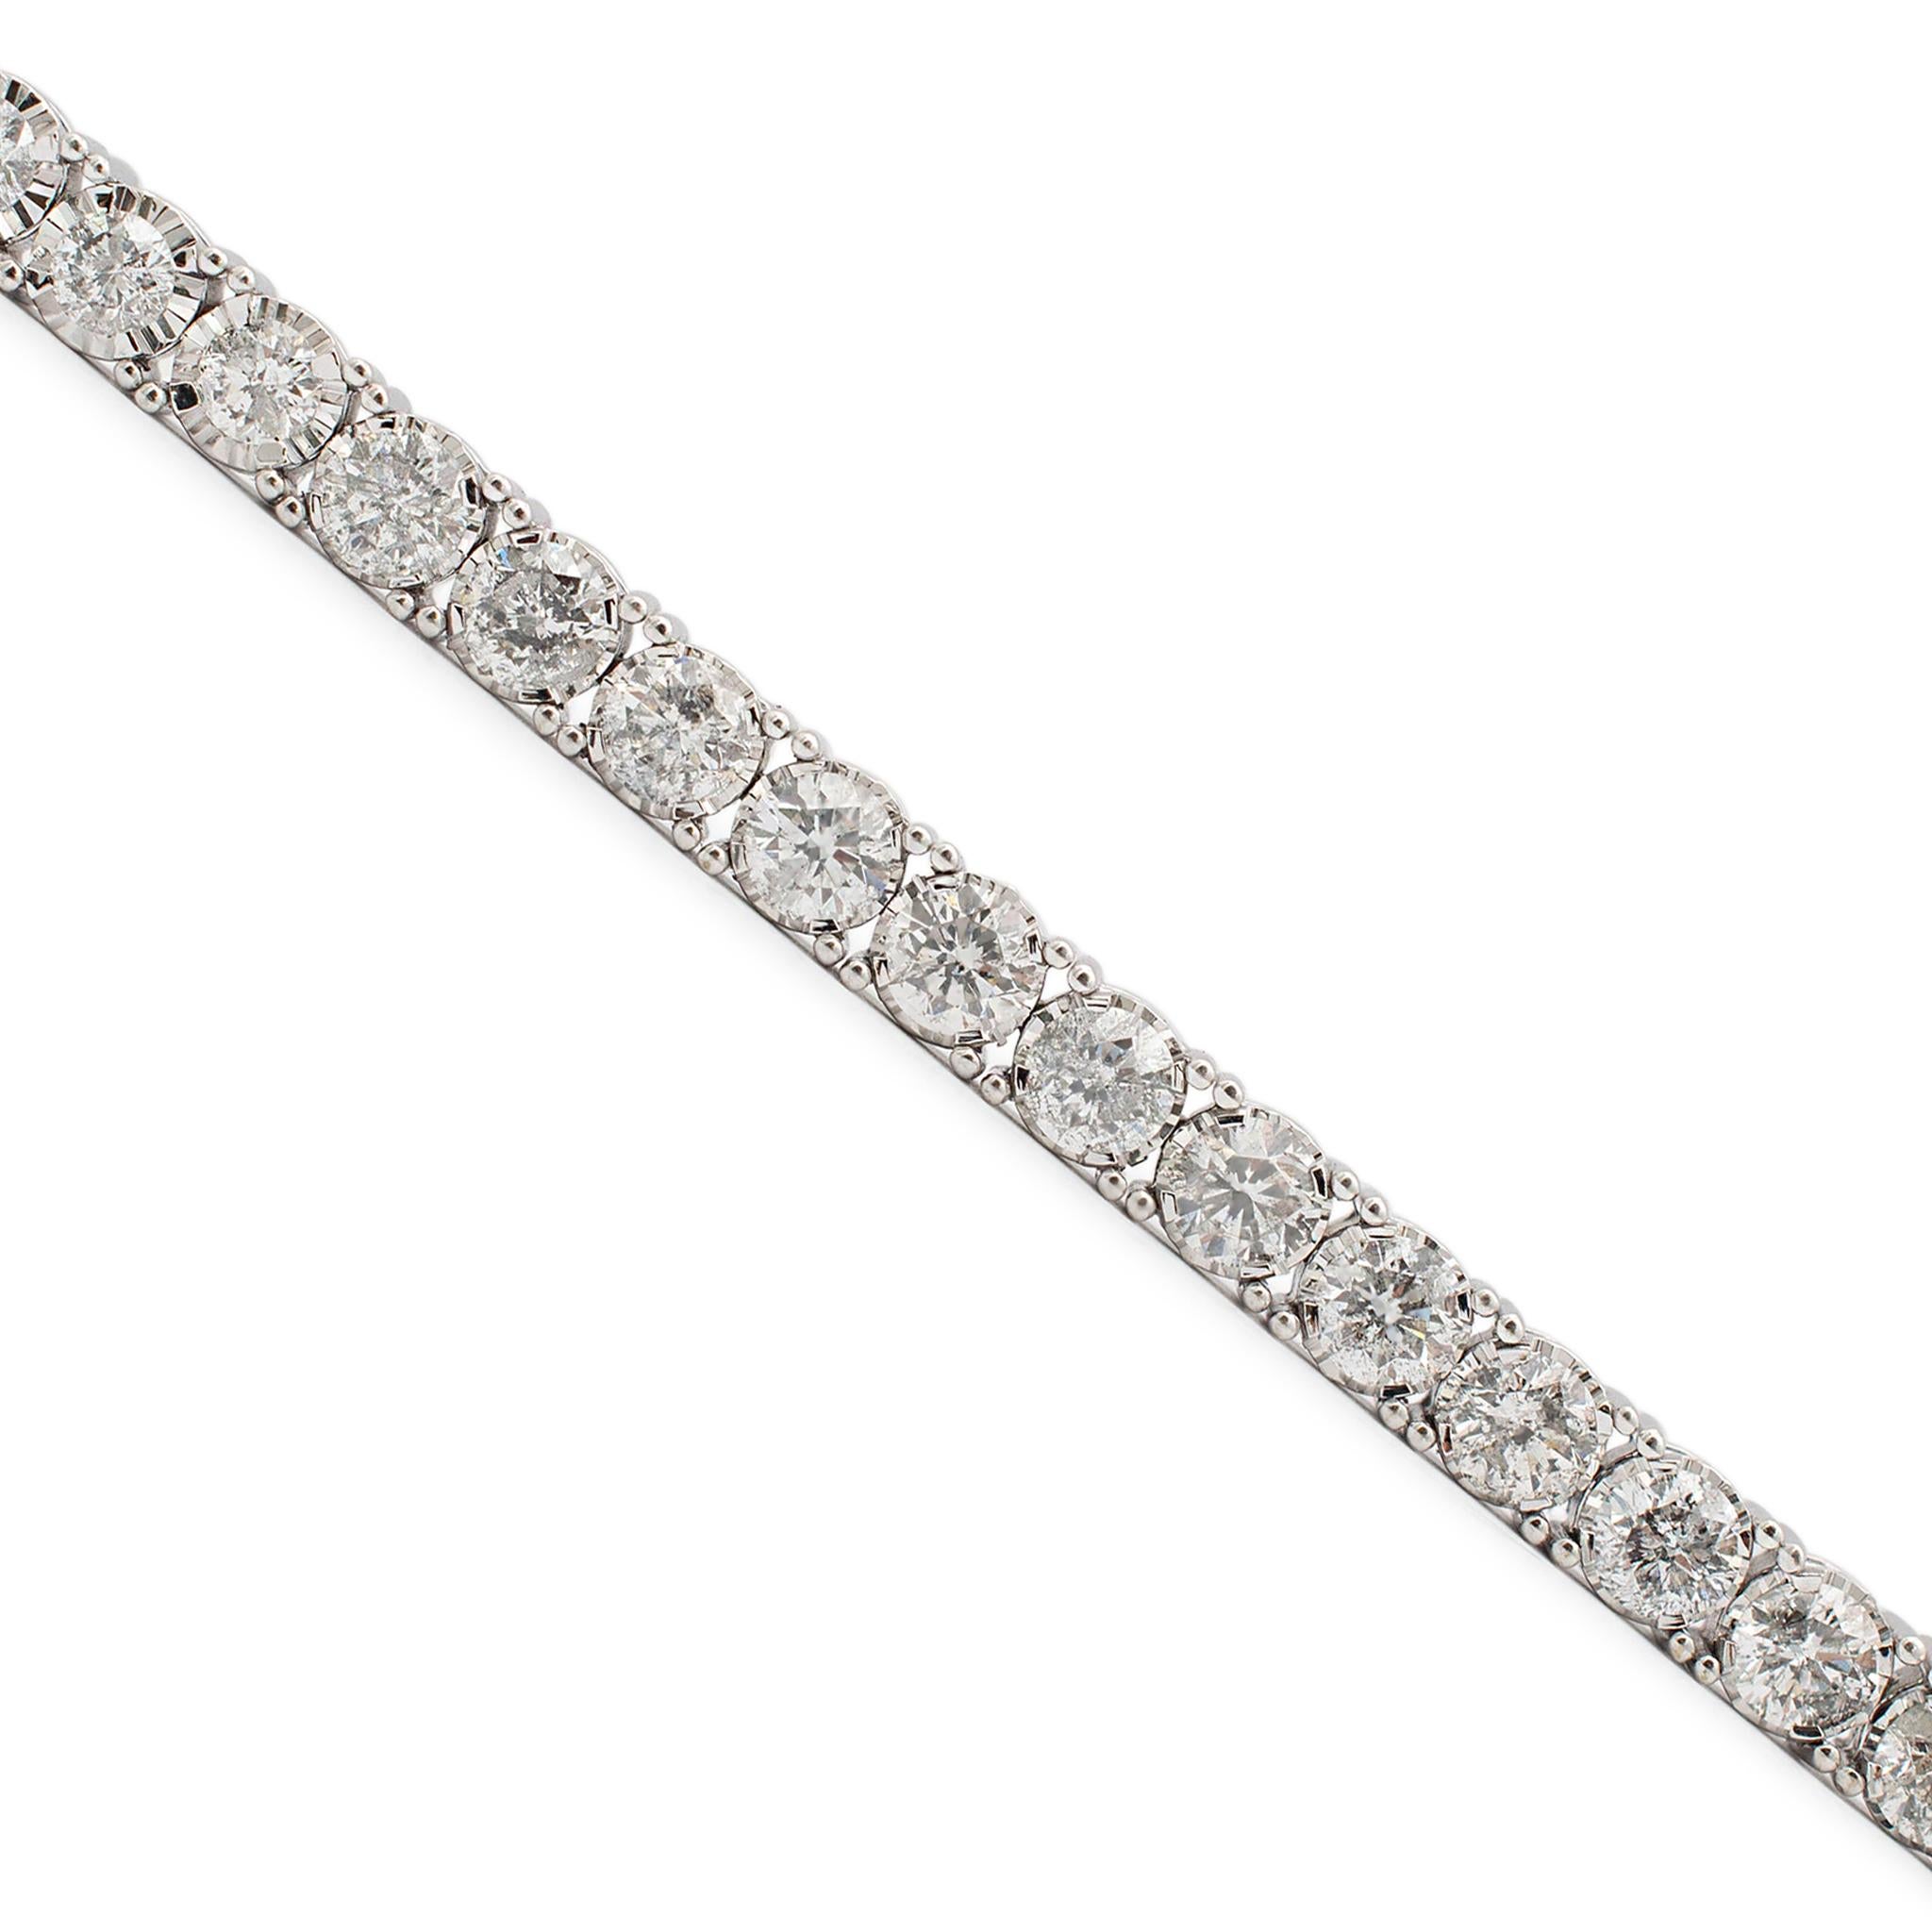 Gender: Unisex

Metal Type: 10K White Gold

Length: 7.50 Inches

Width: 4.00mm 

Weight: 11.92 grams

10K white gold diamond tennis bracelet. Engraved with 